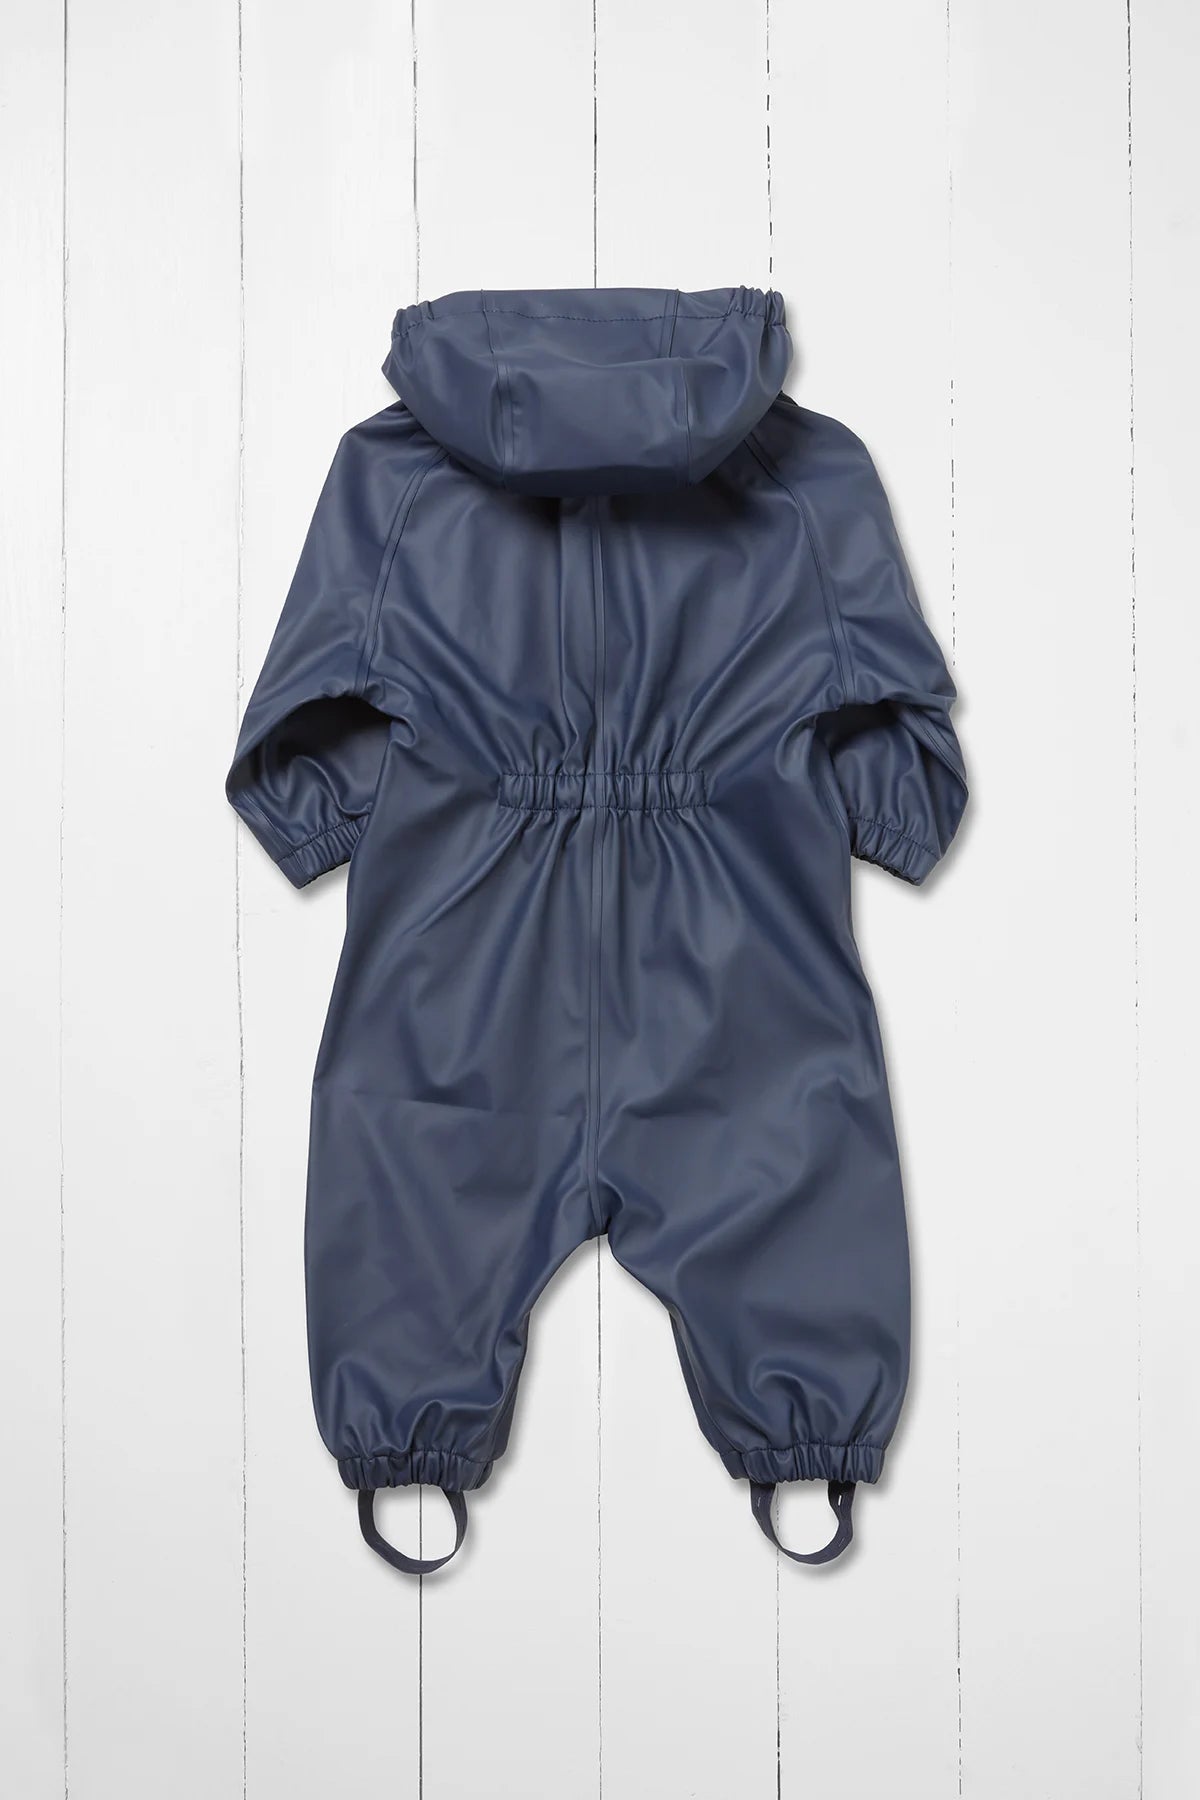 Navy Puddle Stomper Suit